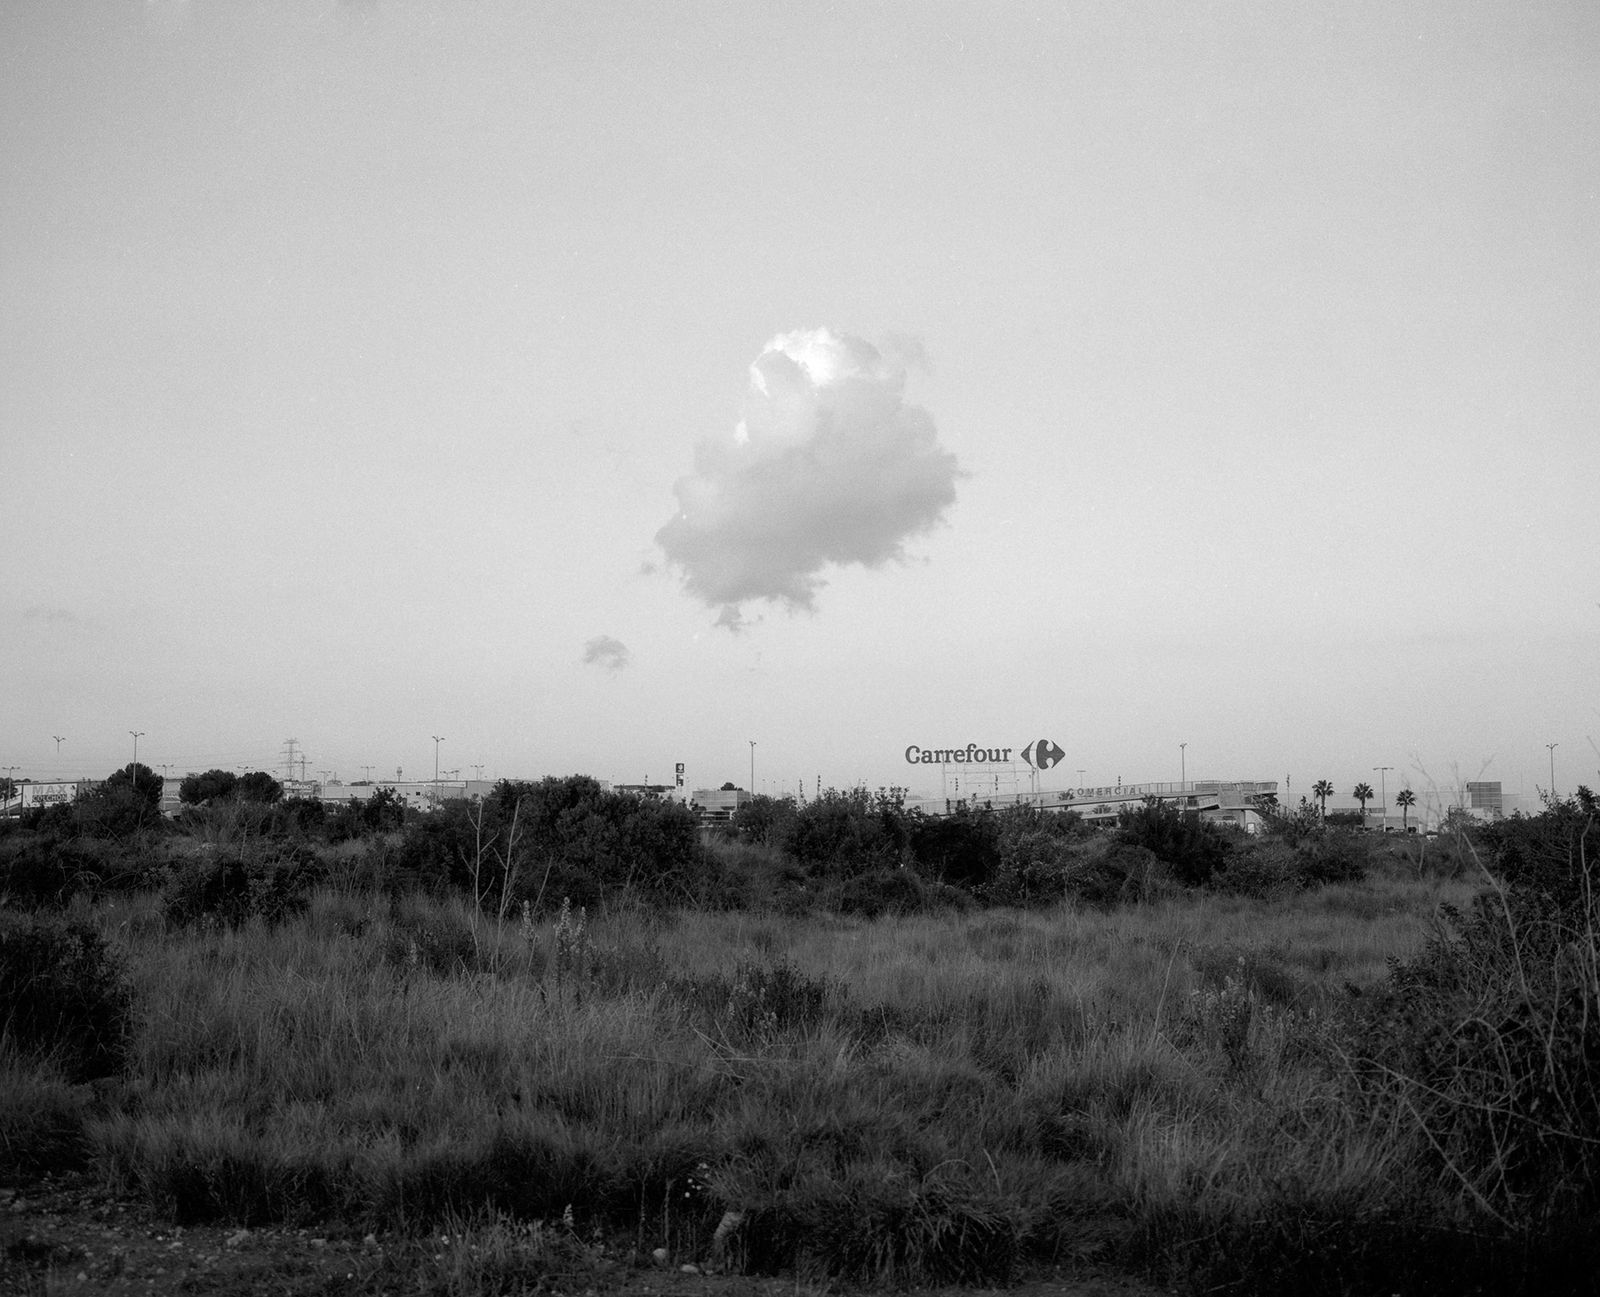 © Gerard Boyer - Image from the The shadow of the cloud photography project